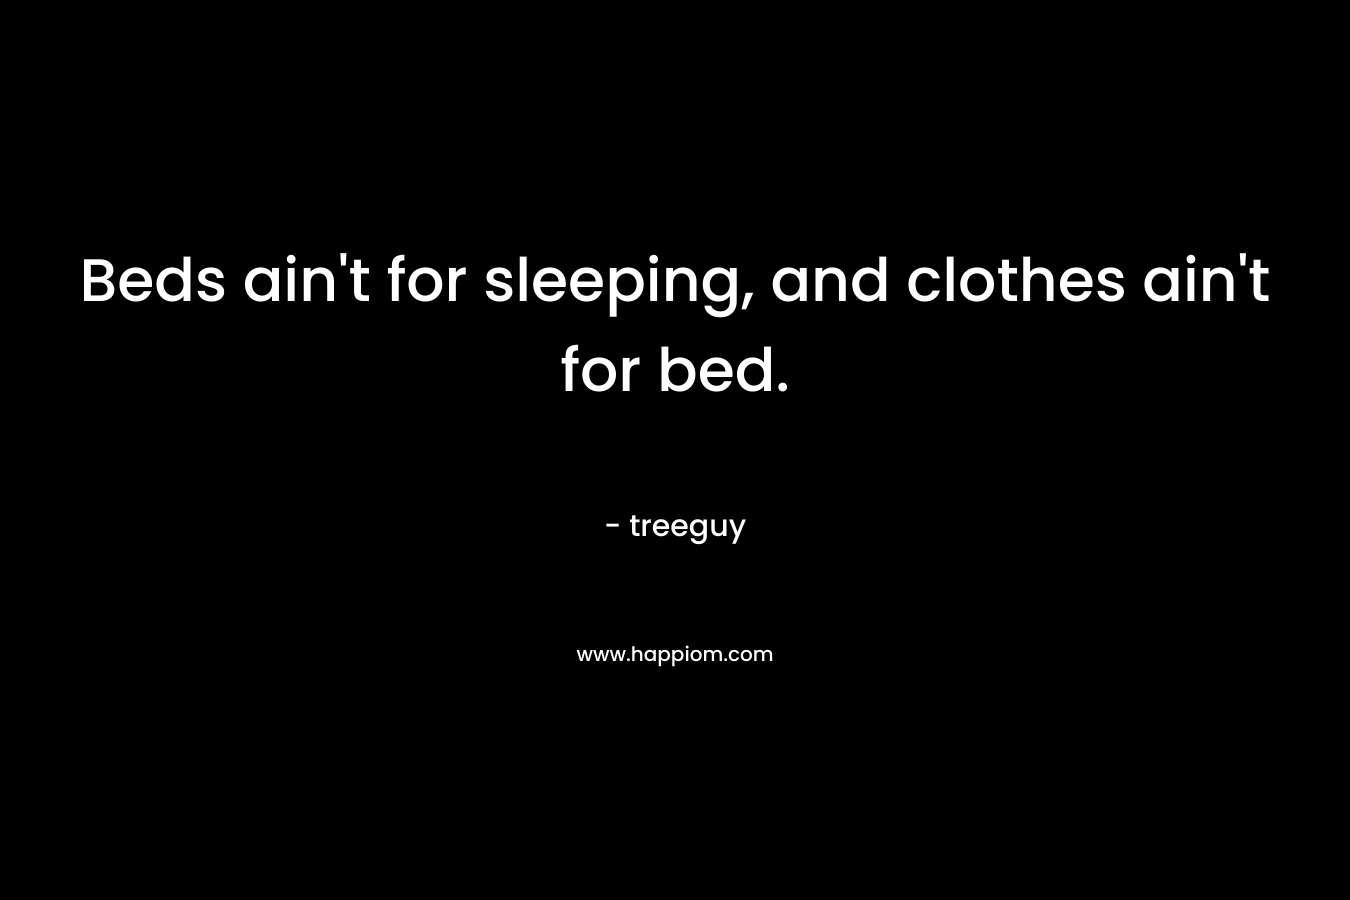 Beds ain't for sleeping, and clothes ain't for bed.